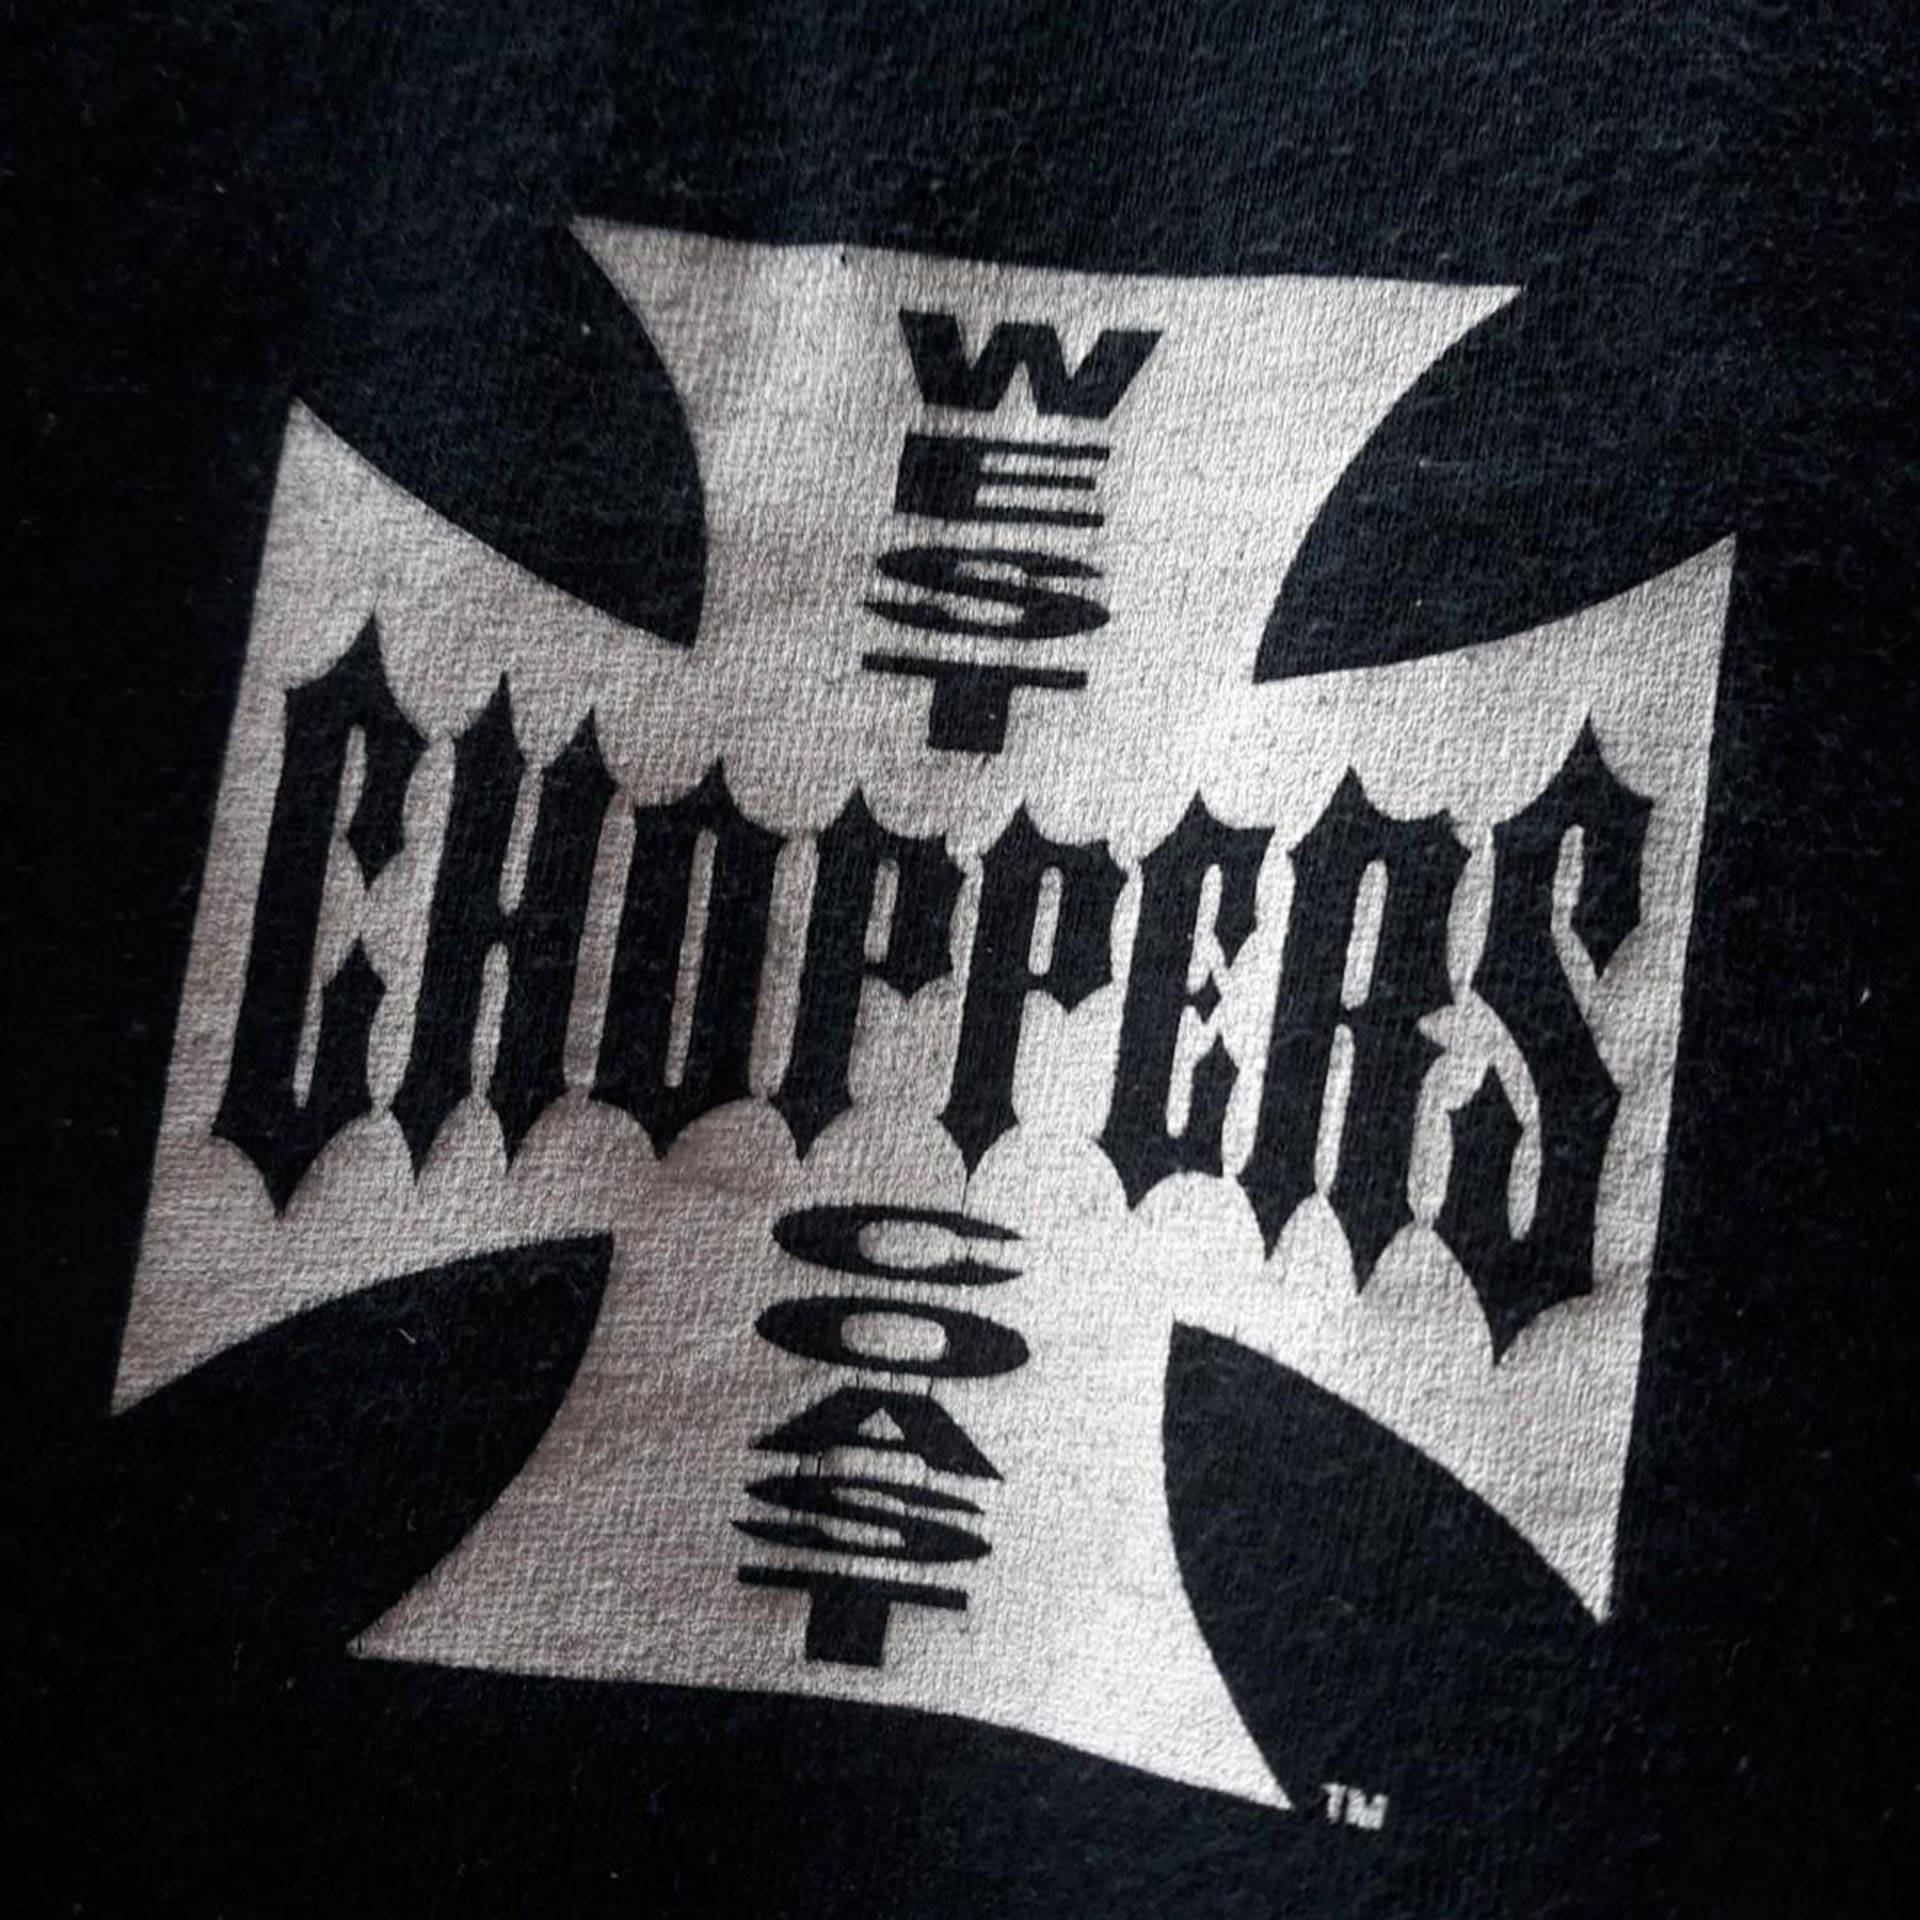 The vibrant and iconic logo of West Coast Choppers Wallpaper